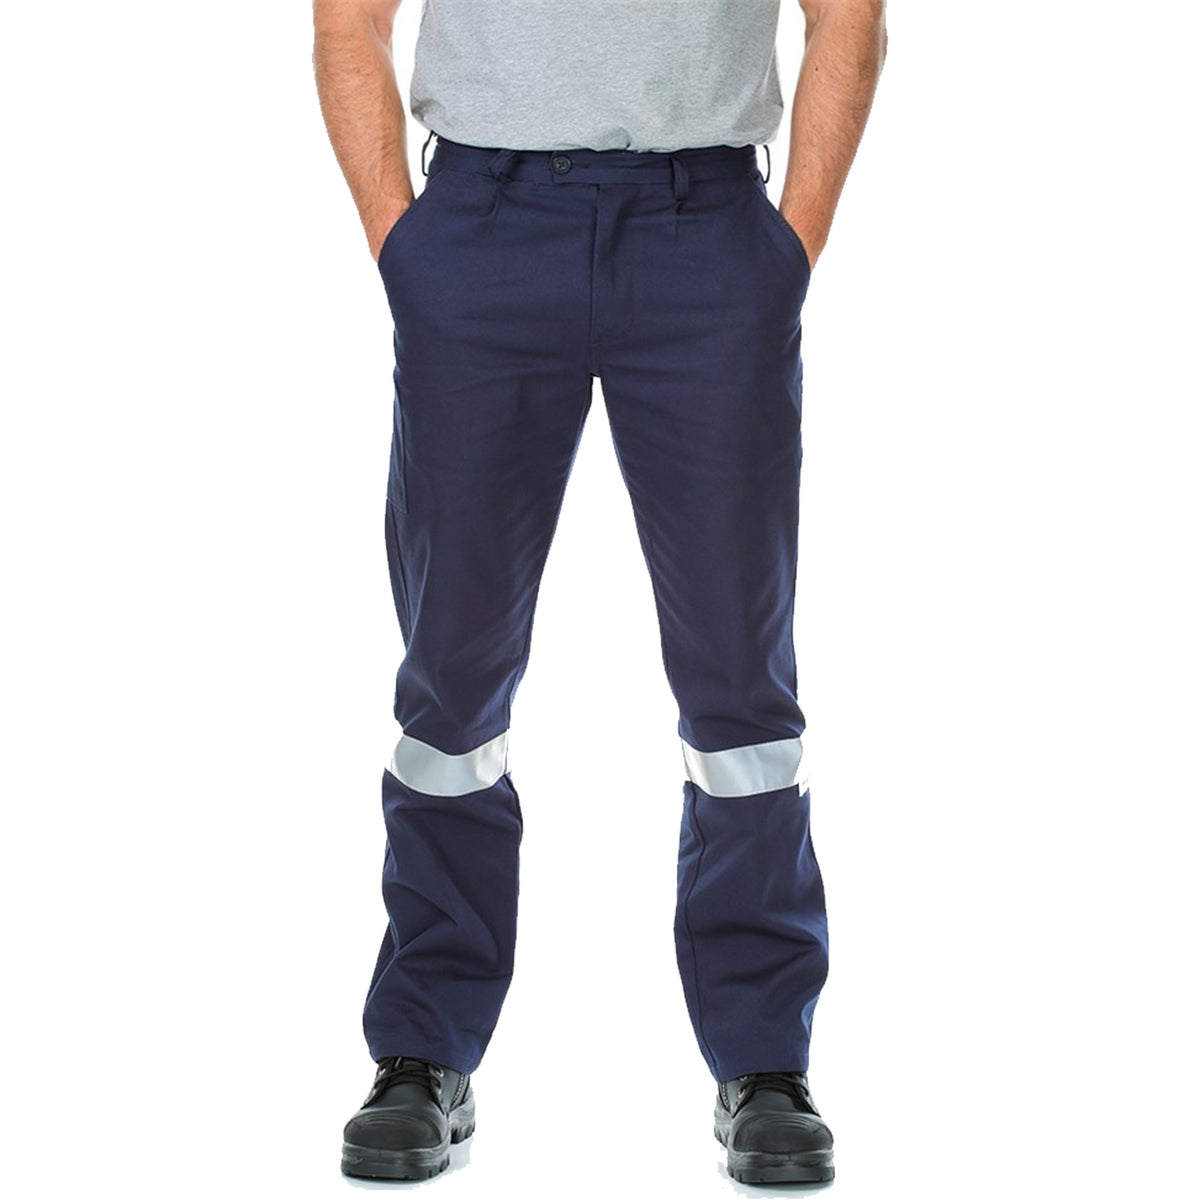 regular cotton drill work pants with reflective tape in navy